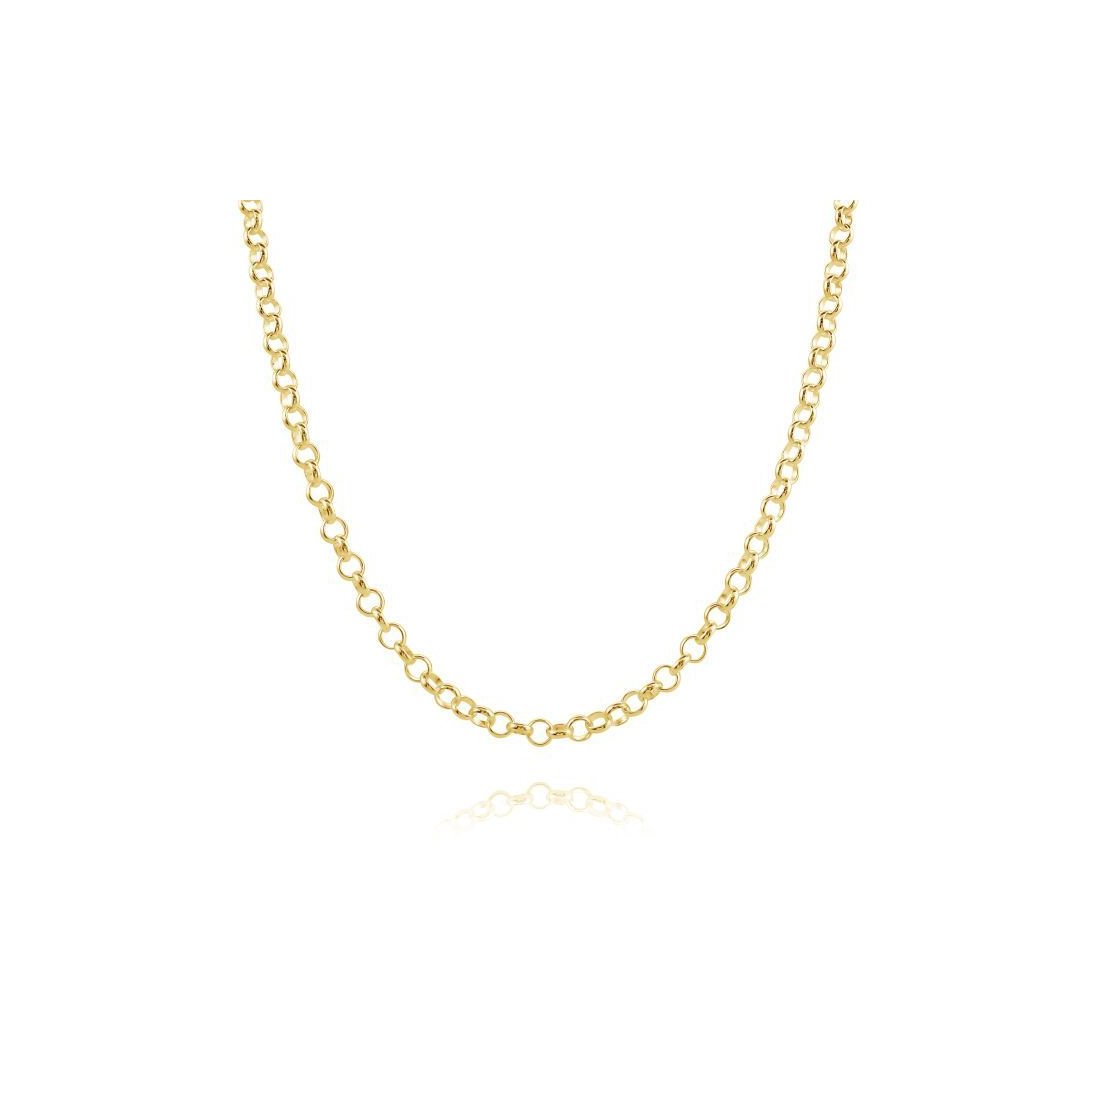 3MM 040 Yellow Gold Rolo Chain .925 Sterling Silver Length "16-20"